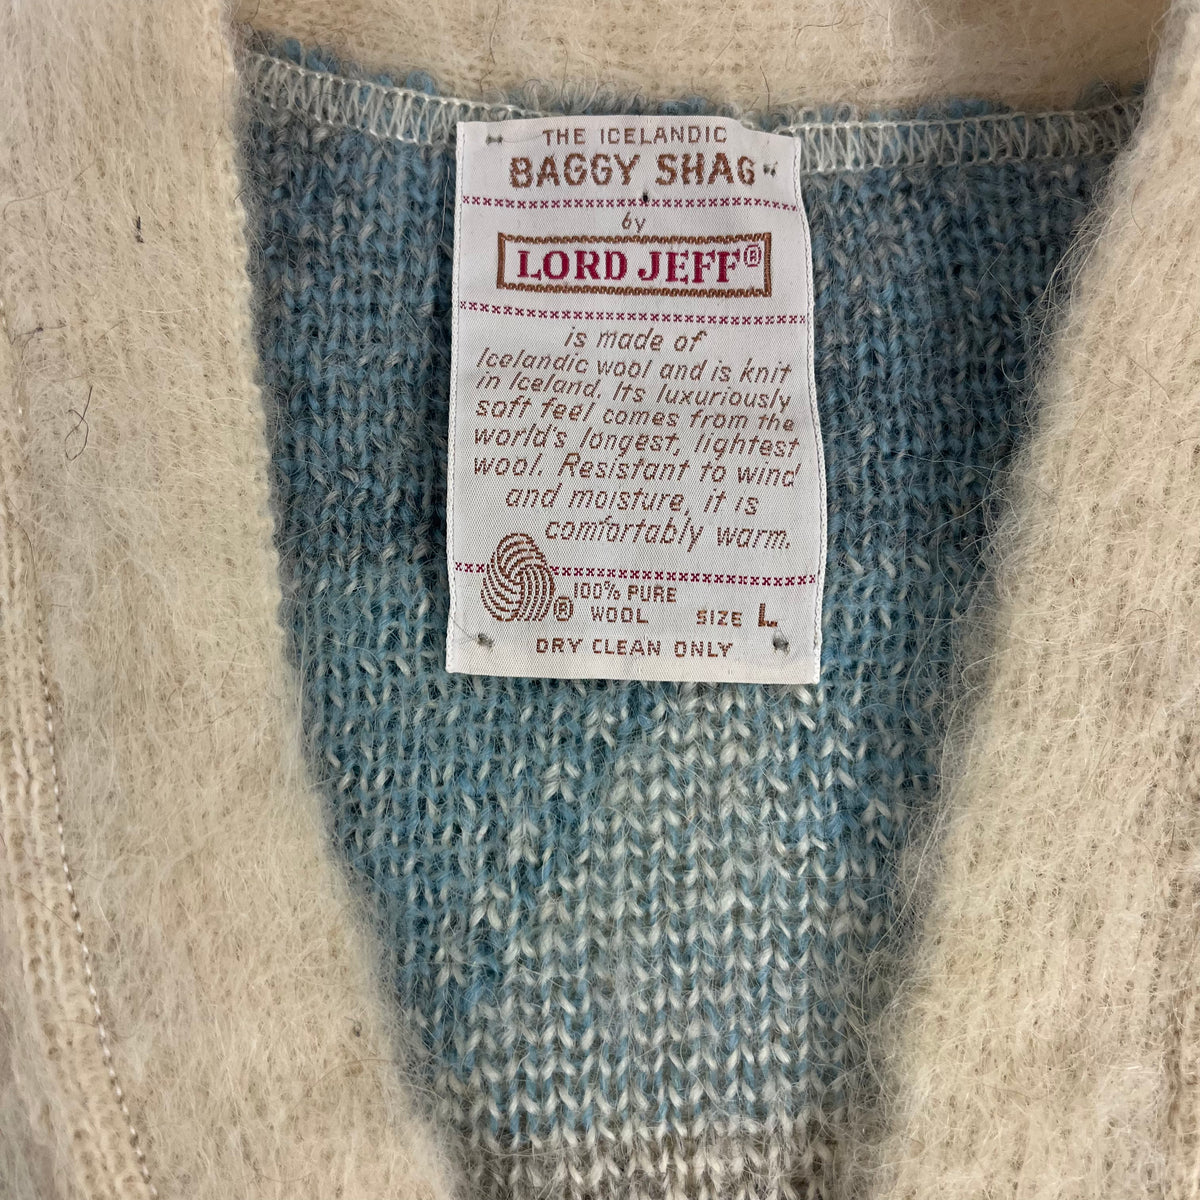 Vintage Icelandic Baggy Shag &quot;Lord Jeff&quot; Wool Cardigan